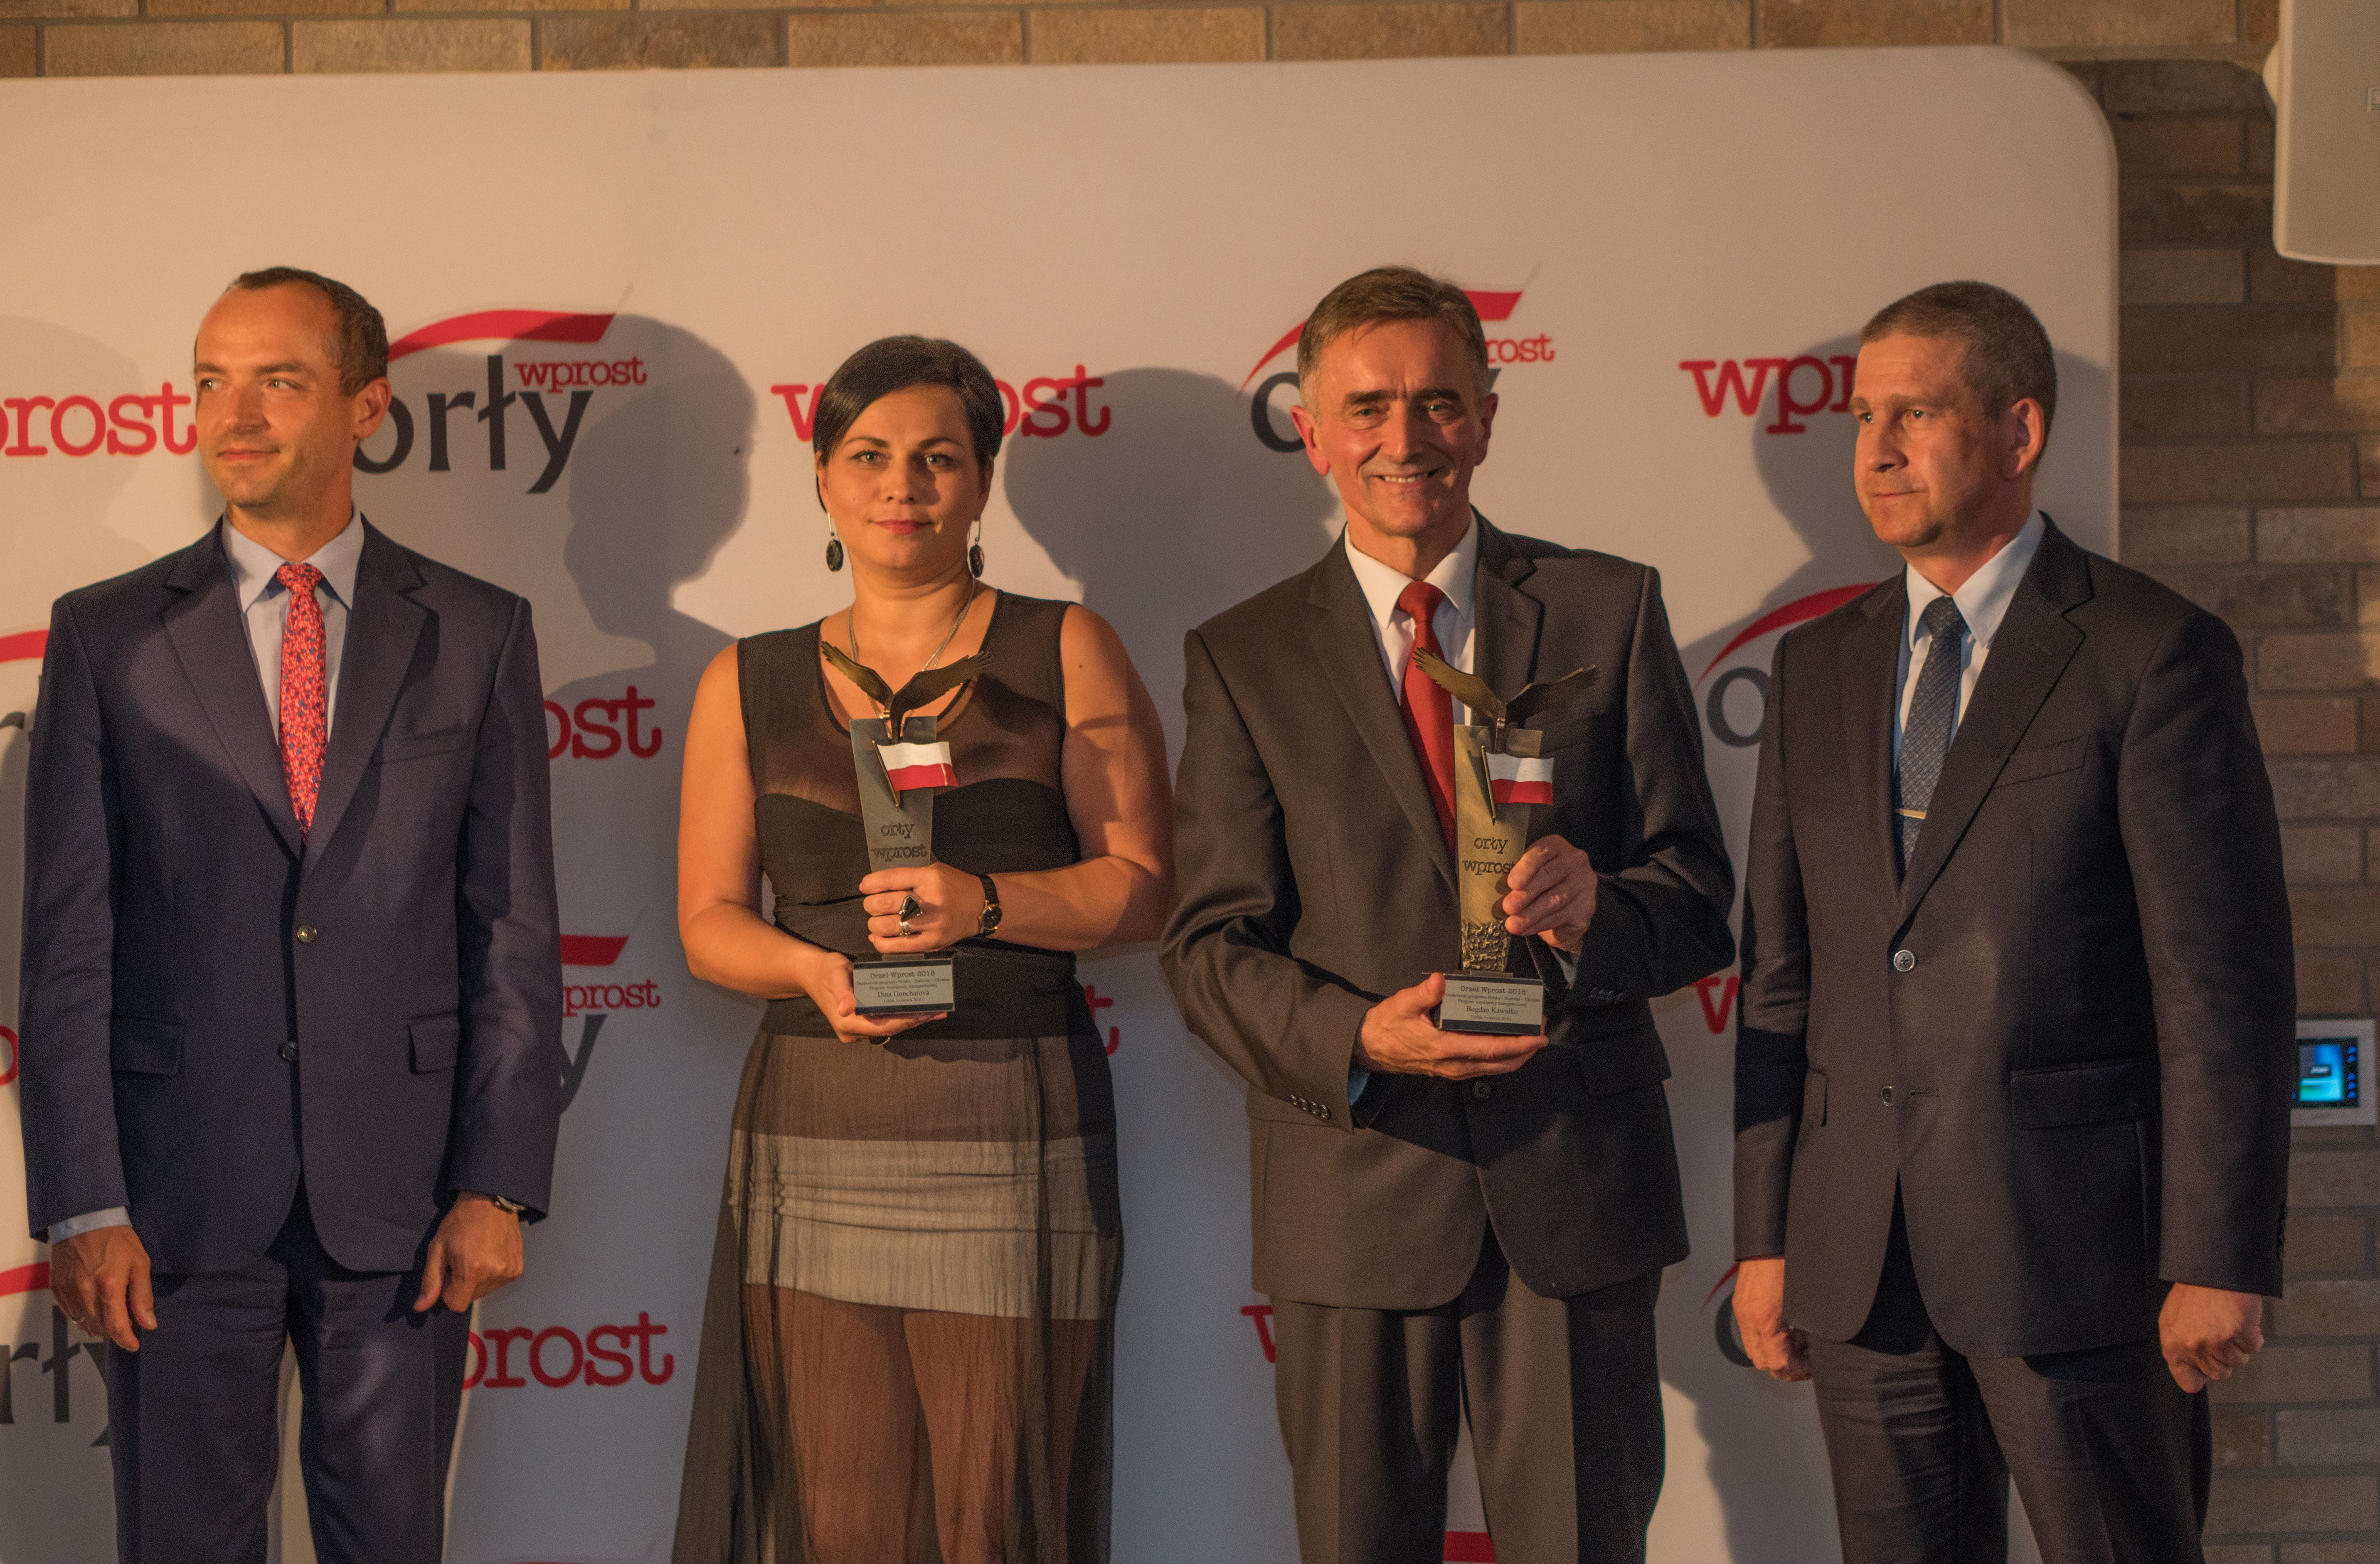 the “Wprost” weekly handed the prestigious "Orły Wprost” prizes